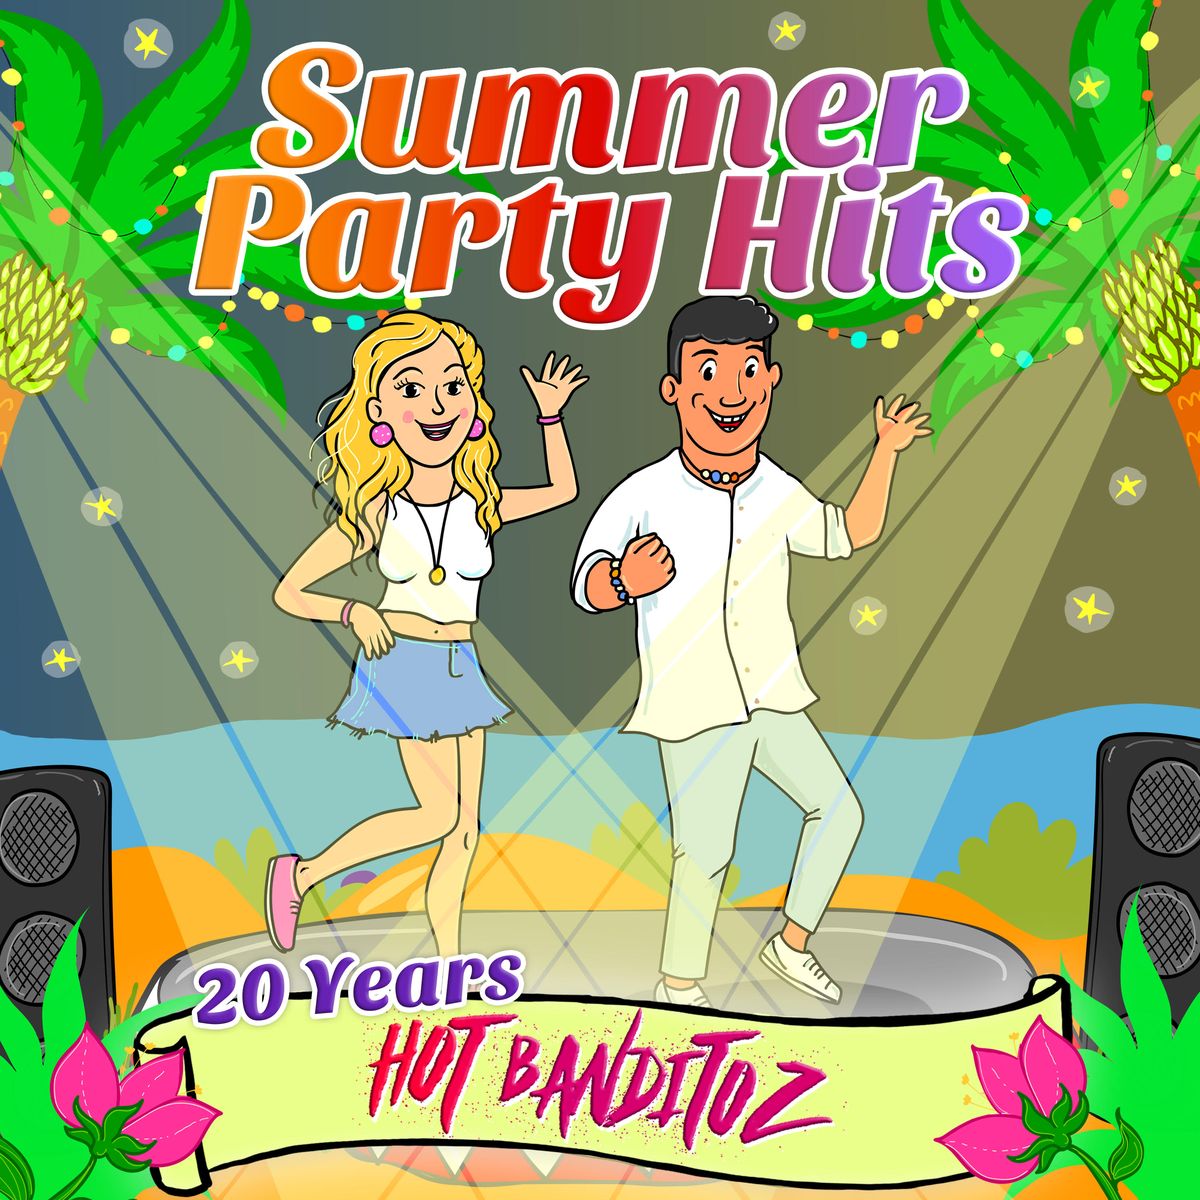 Foto: "Summer Party Hits - 20 Years"